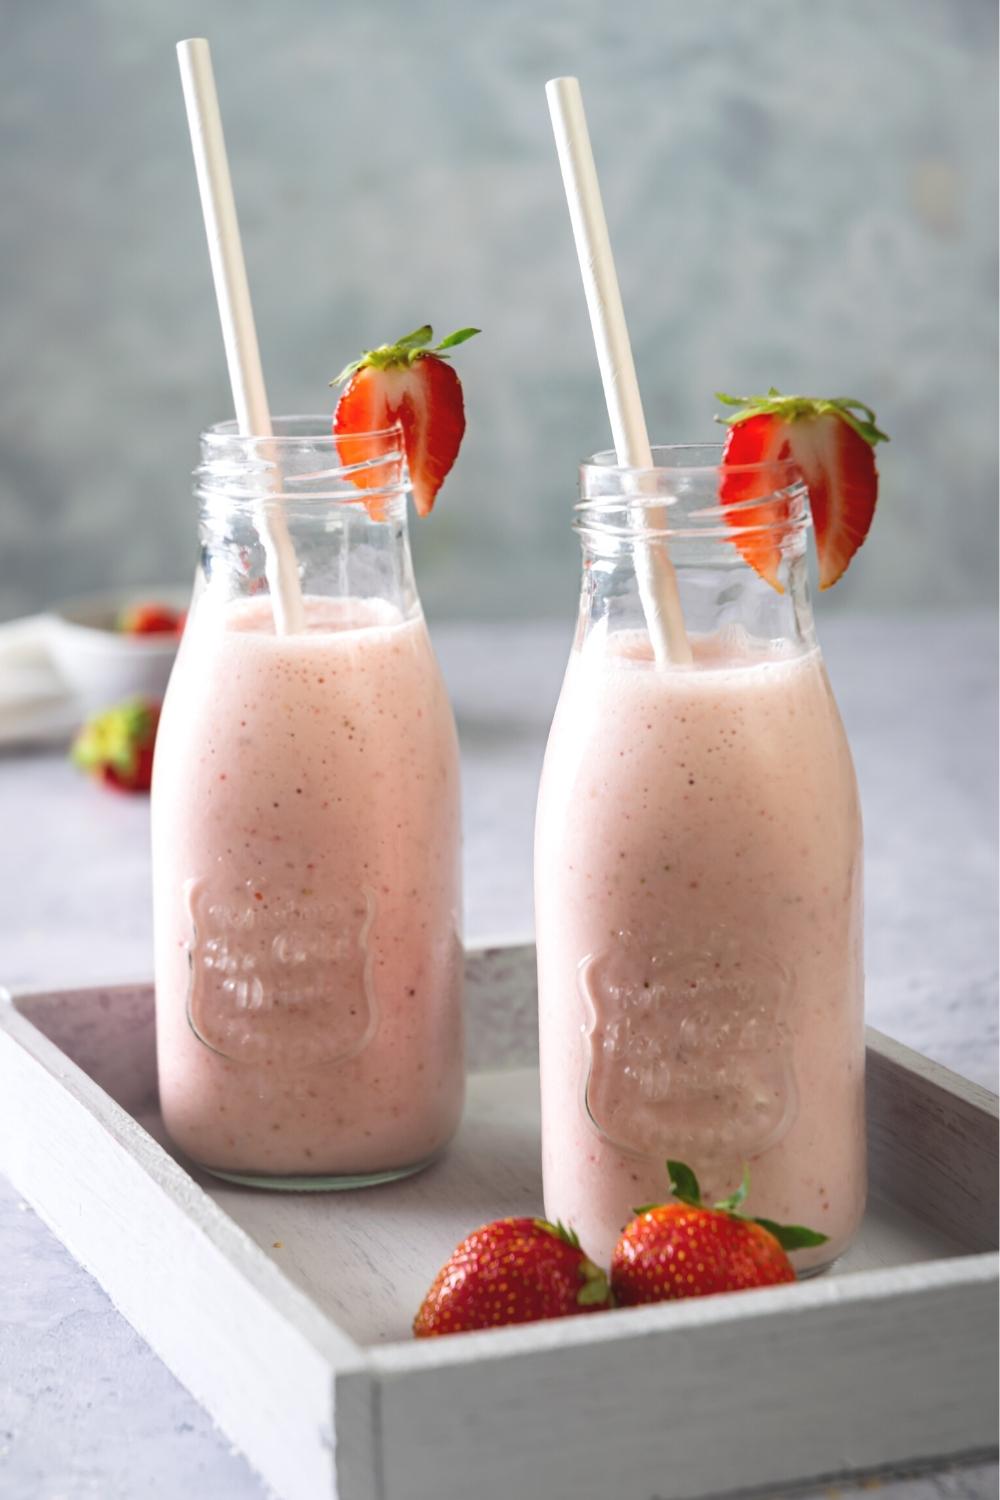 Two strawberry banana smoothies in glasses with a straw in it and sliced strawberry on the rim.